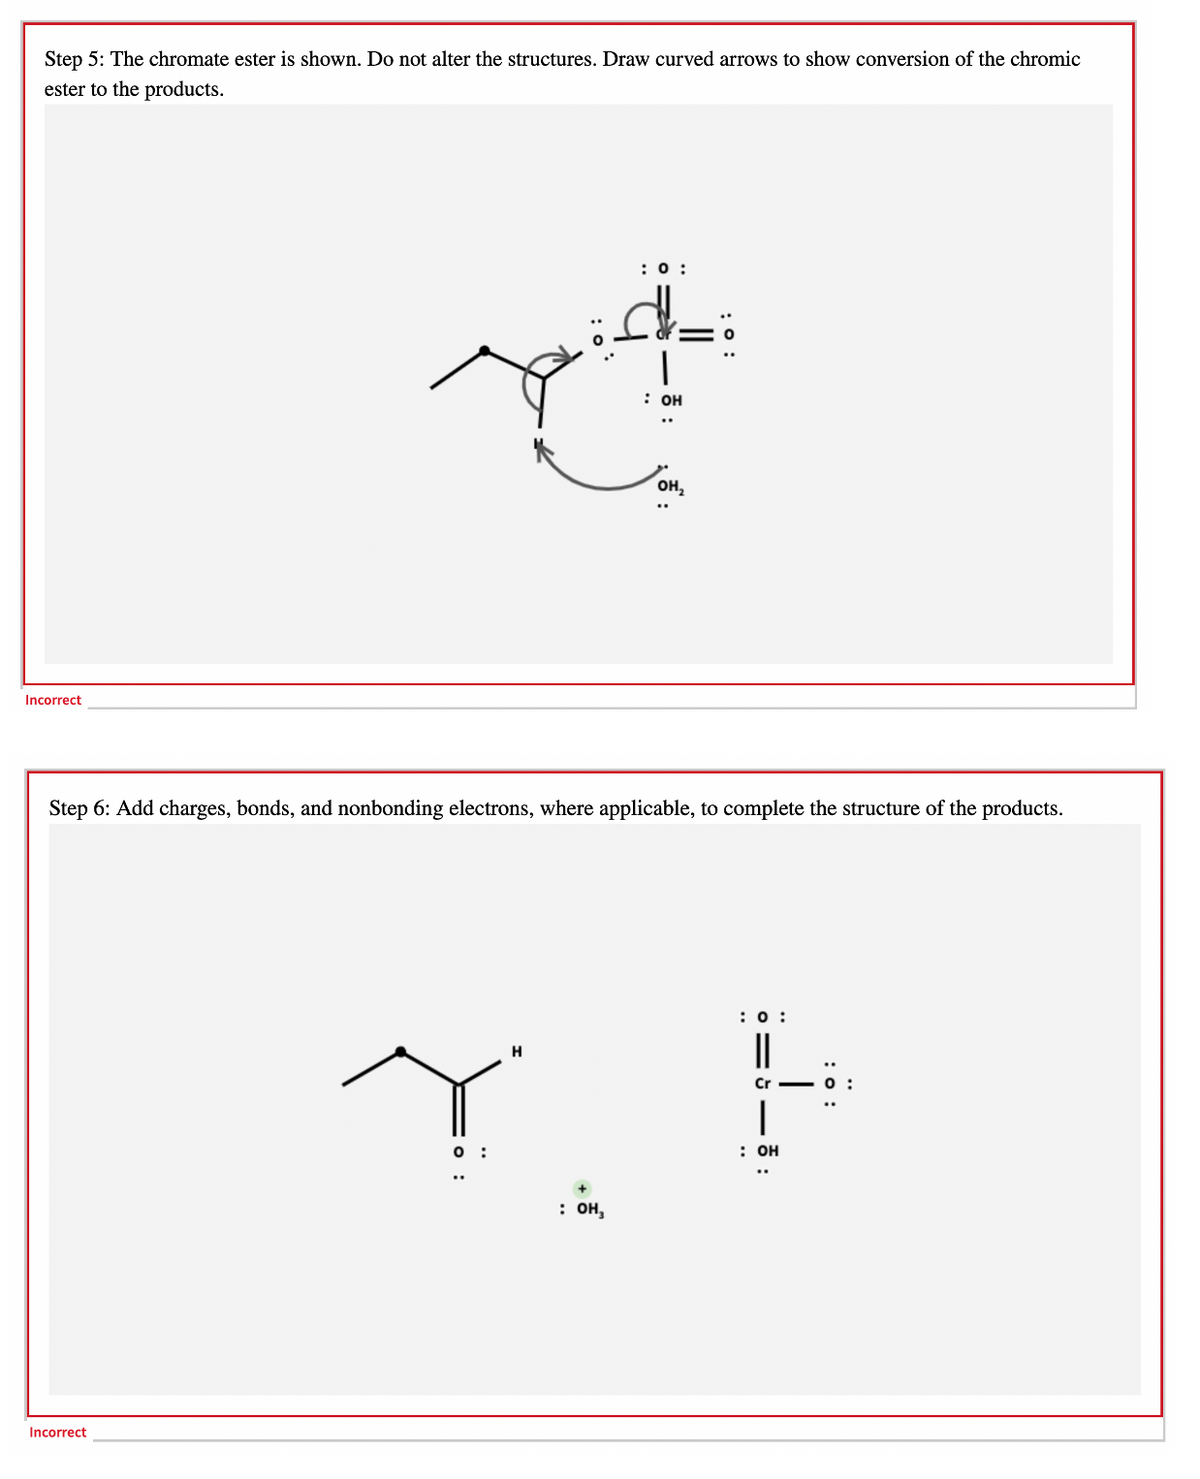 Step 5: The chromate ester is shown. Do not alter the structures. Draw curved arrows to show conversion of the chromic
ester to the products.
:0 :
: он
он,
Incorrect
Step 6: Add charges, bonds, and nonbonding electrons, where applicable, to complete the structure of the products.
:0 :
|
H
Cr
O :
: он
: он,
Incorrect
:
